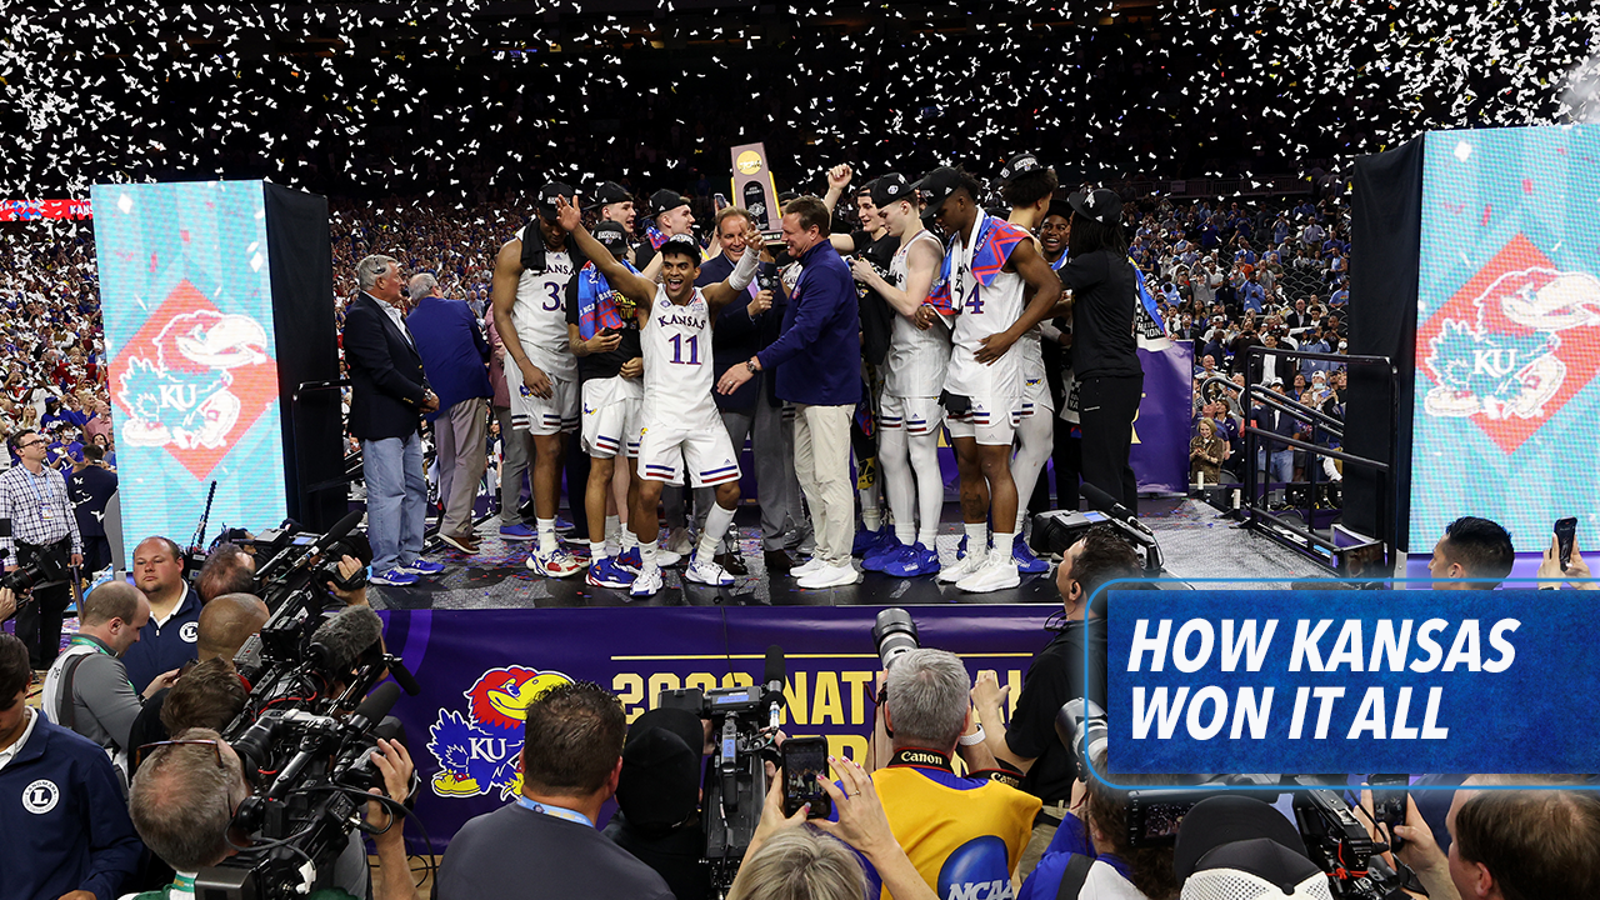 How did Kansas win the national title?